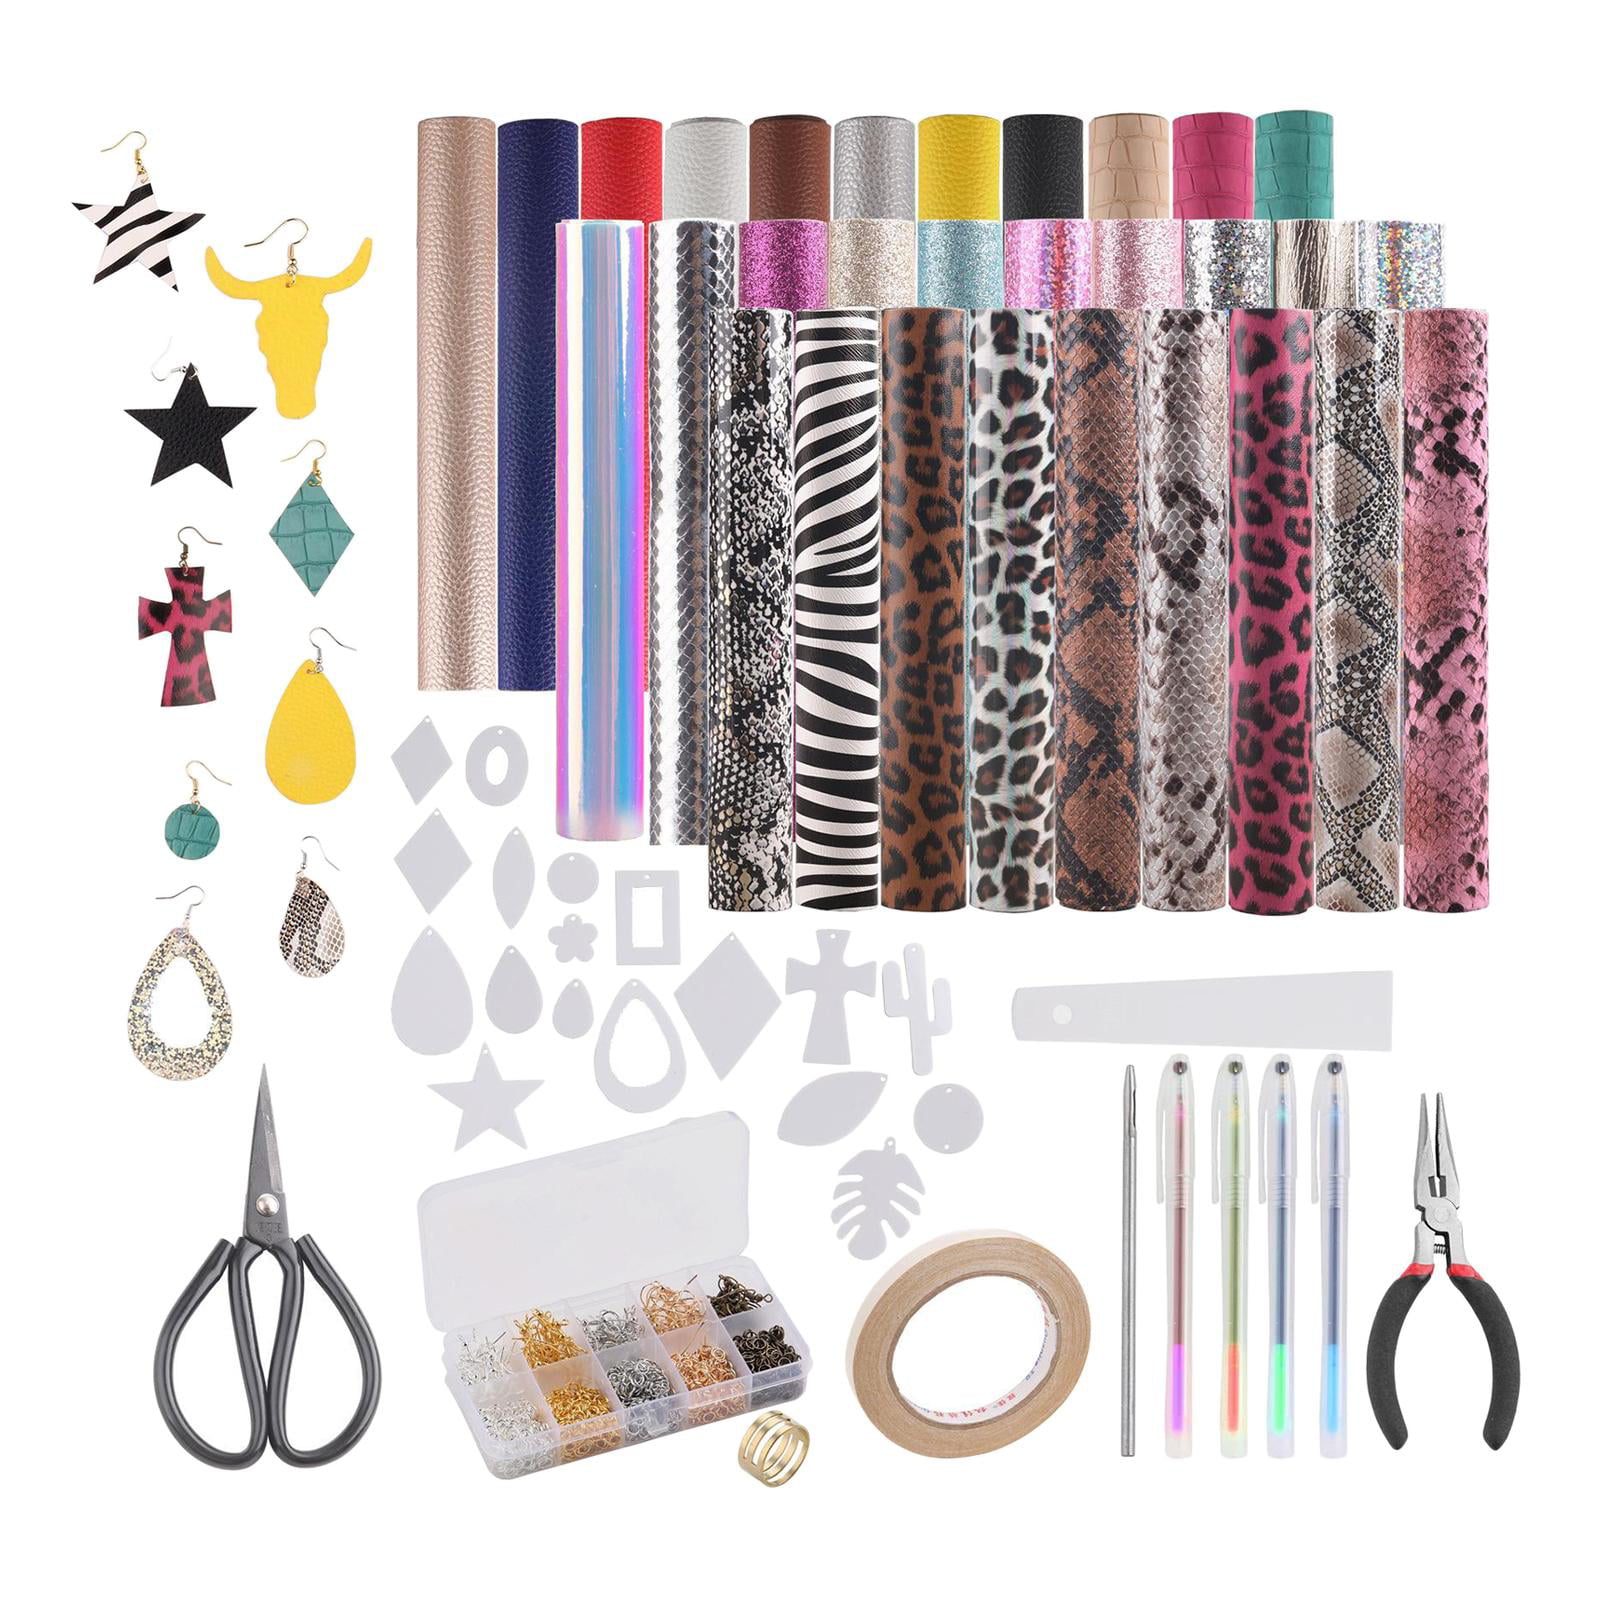 Contain Pre Cut Double Details about    101 Pcs Faux Leather Earrings Making Kit for Beginner 